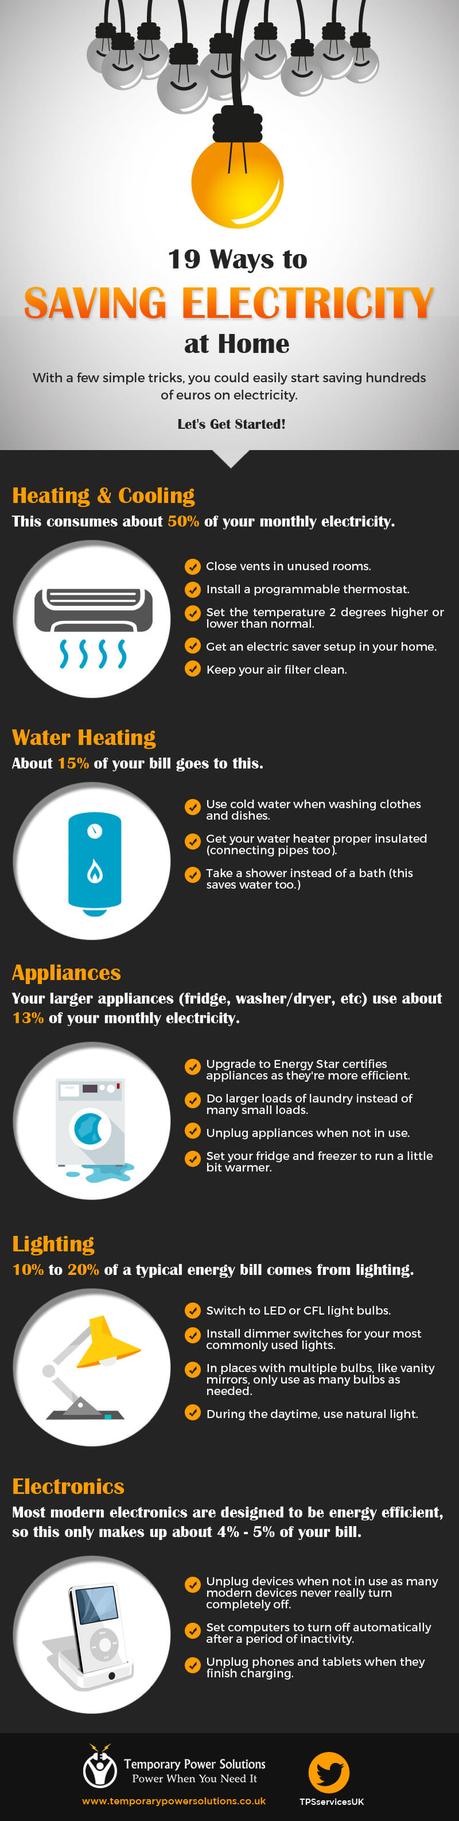 19 Ways to Save Electricity at Home